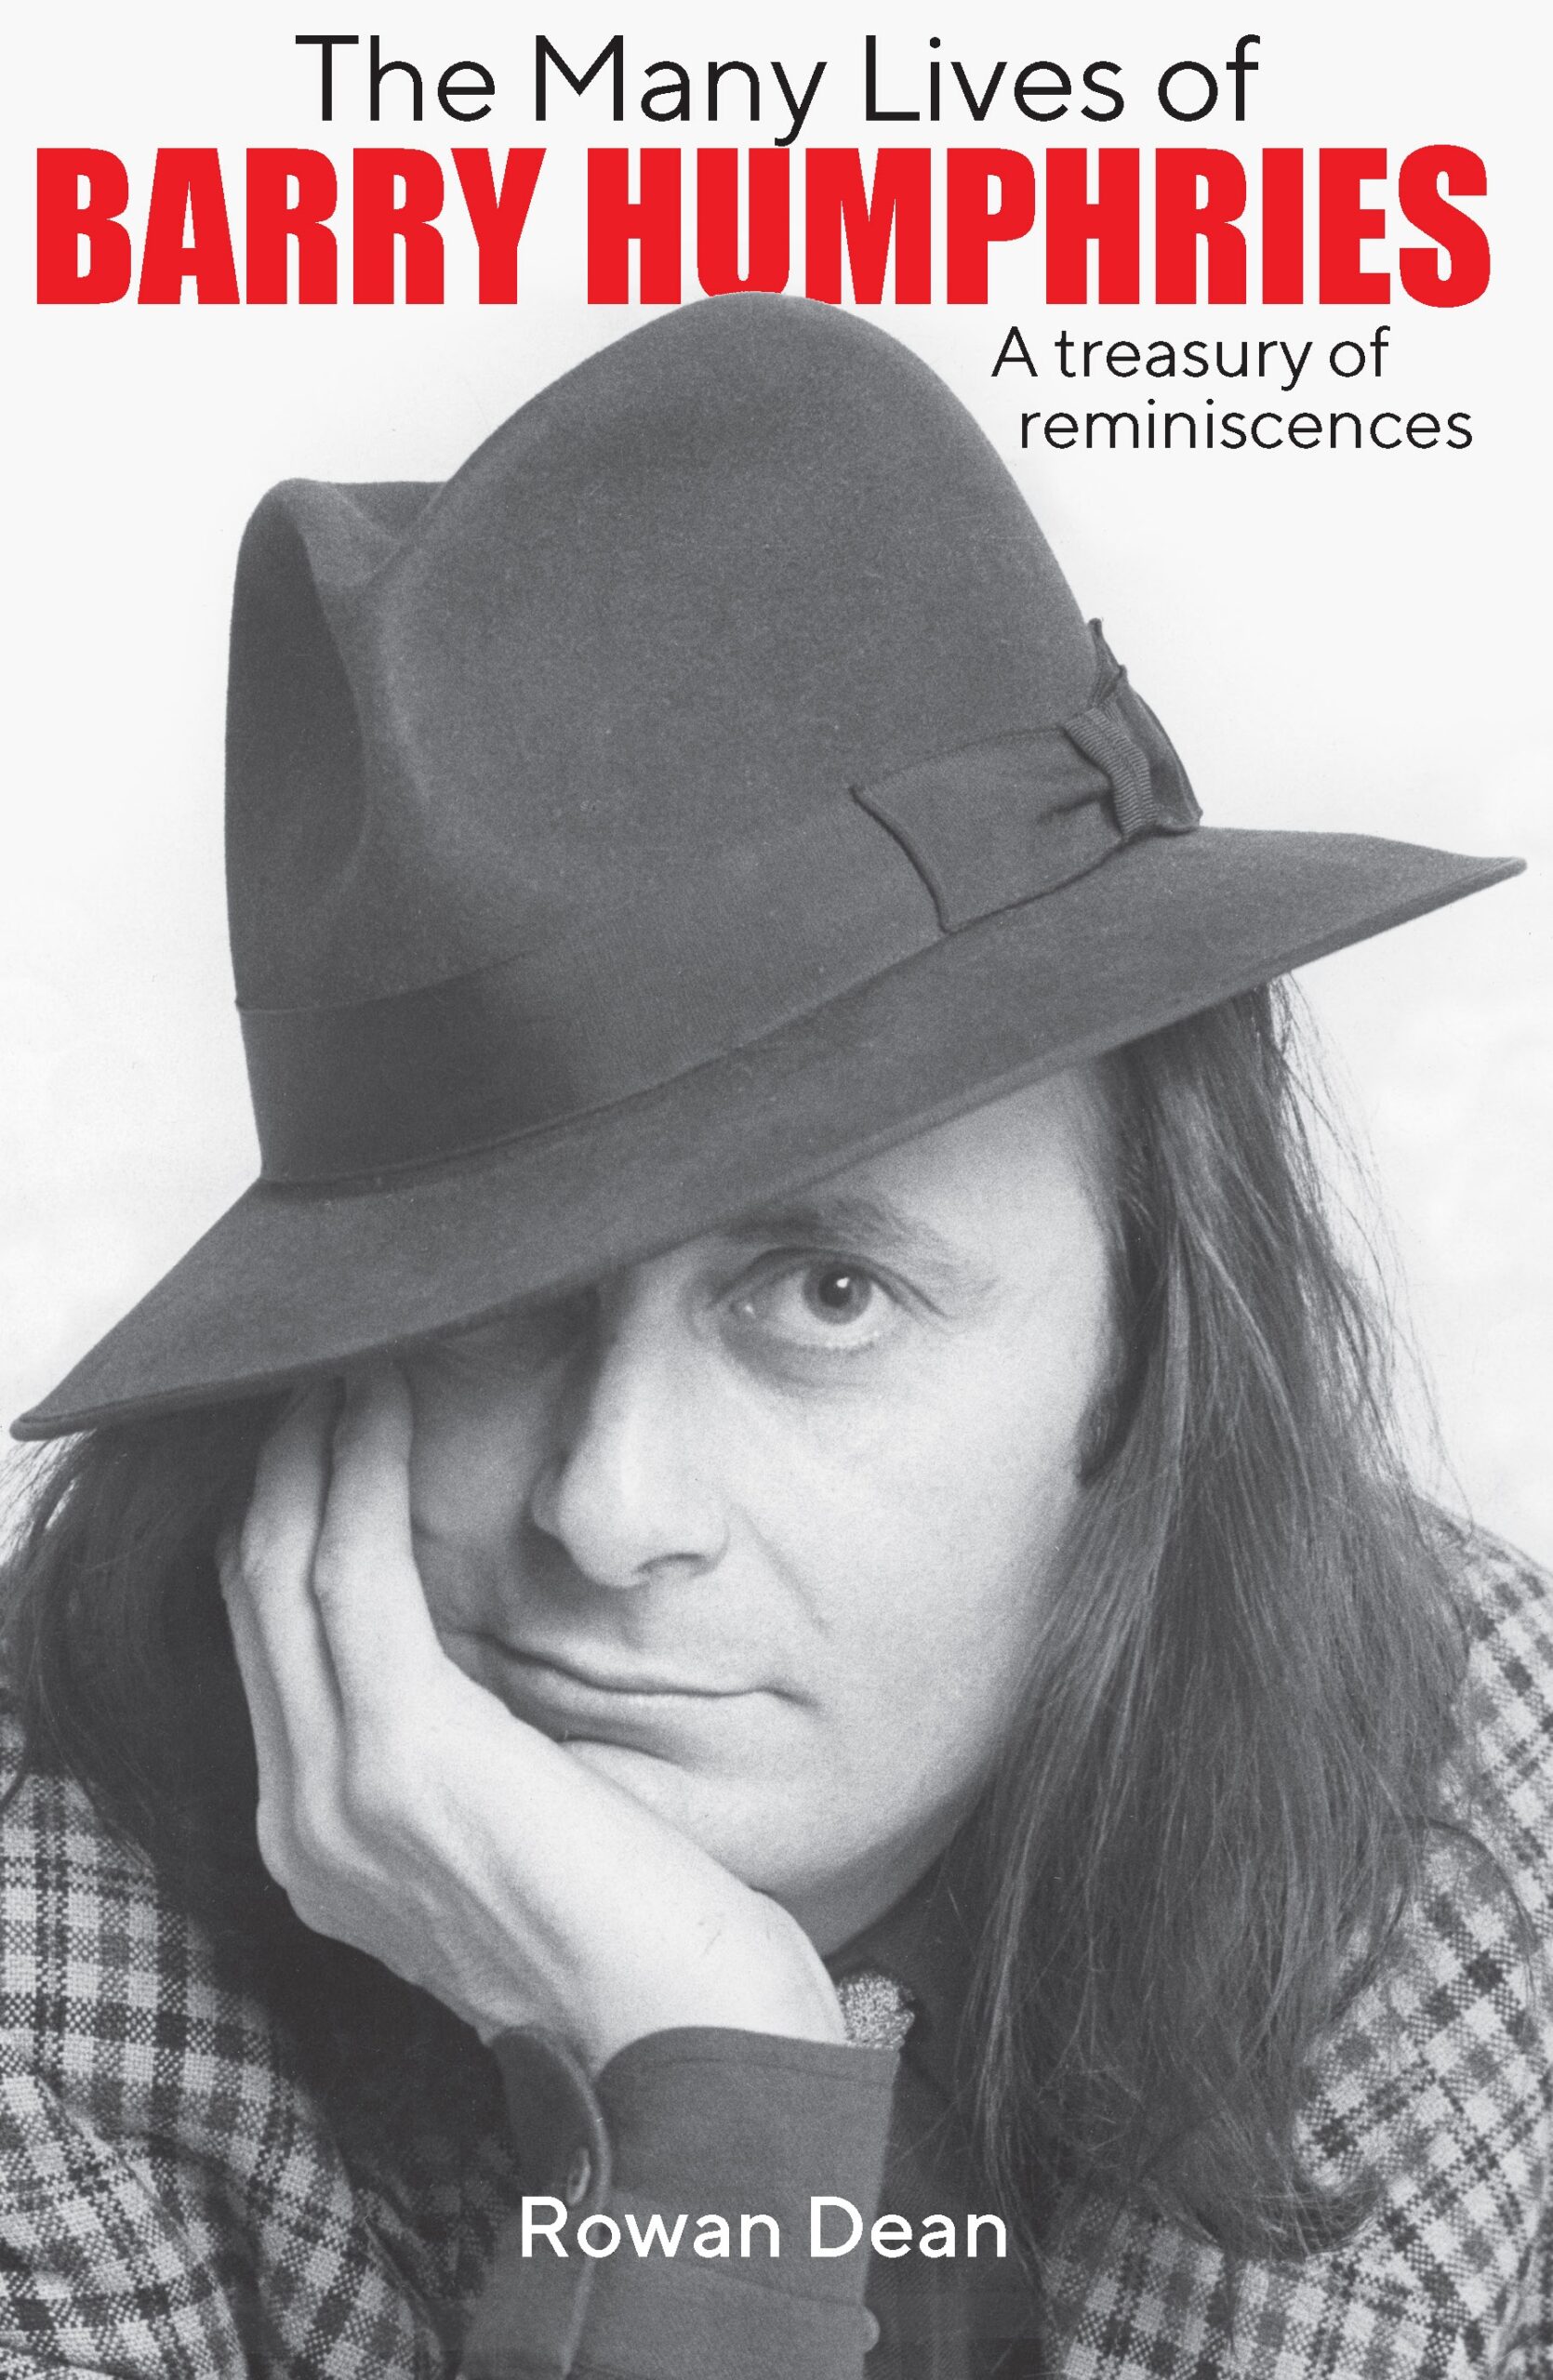 The Many Lives of Barry Humphries - book cover final